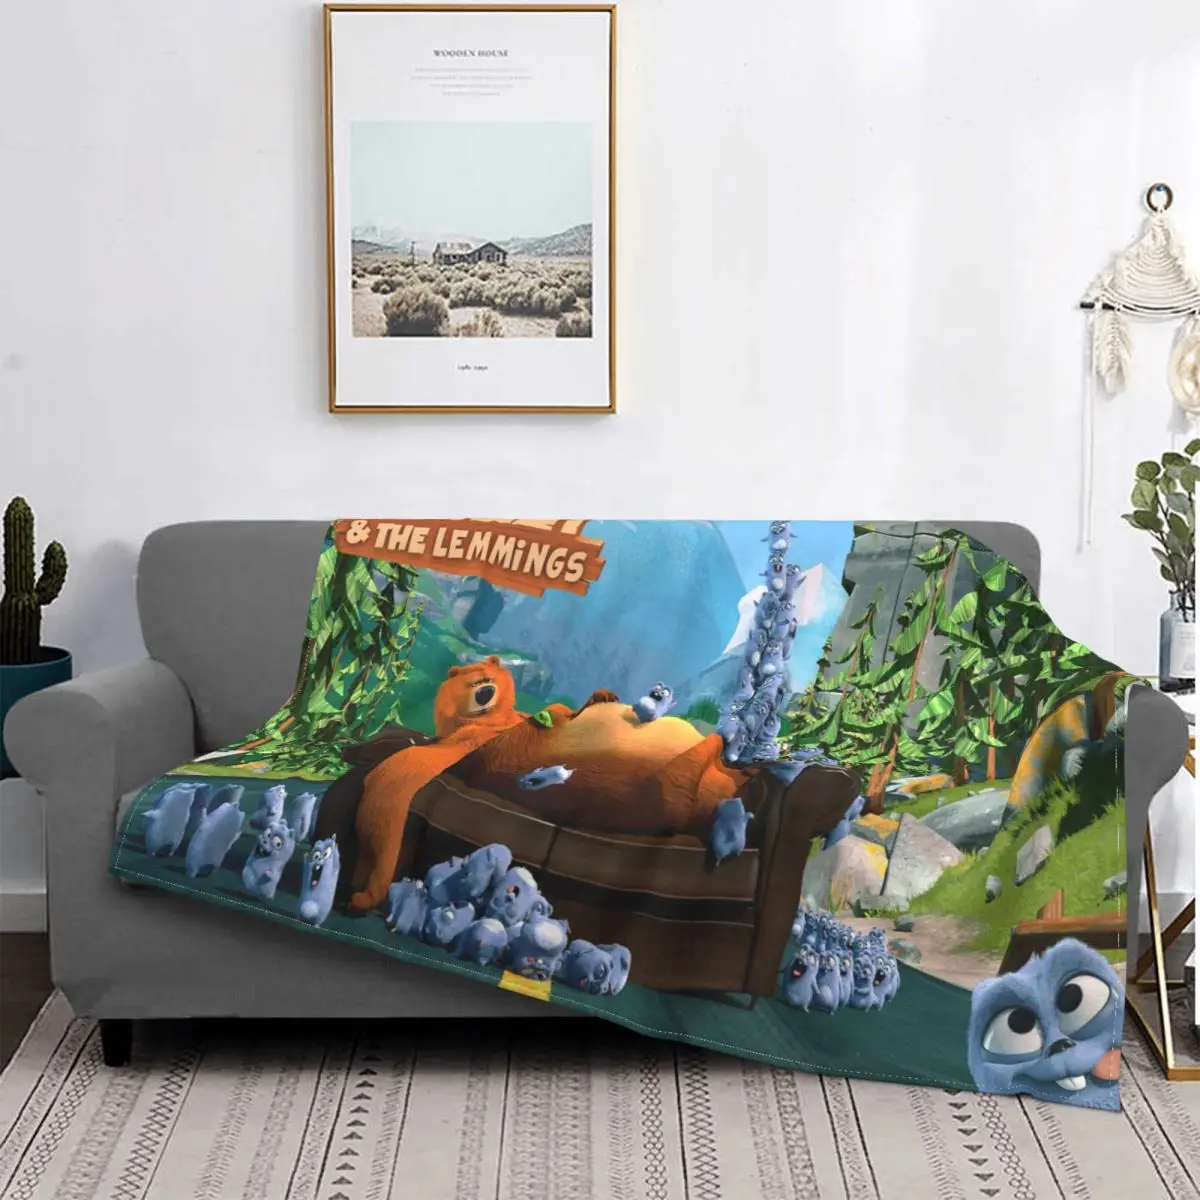 

Grizzy And The Lemmings Blanket Fleece Textile Decor Cute Bear Anime Breathable Warm Throw Blanket for Home Couch Quilt